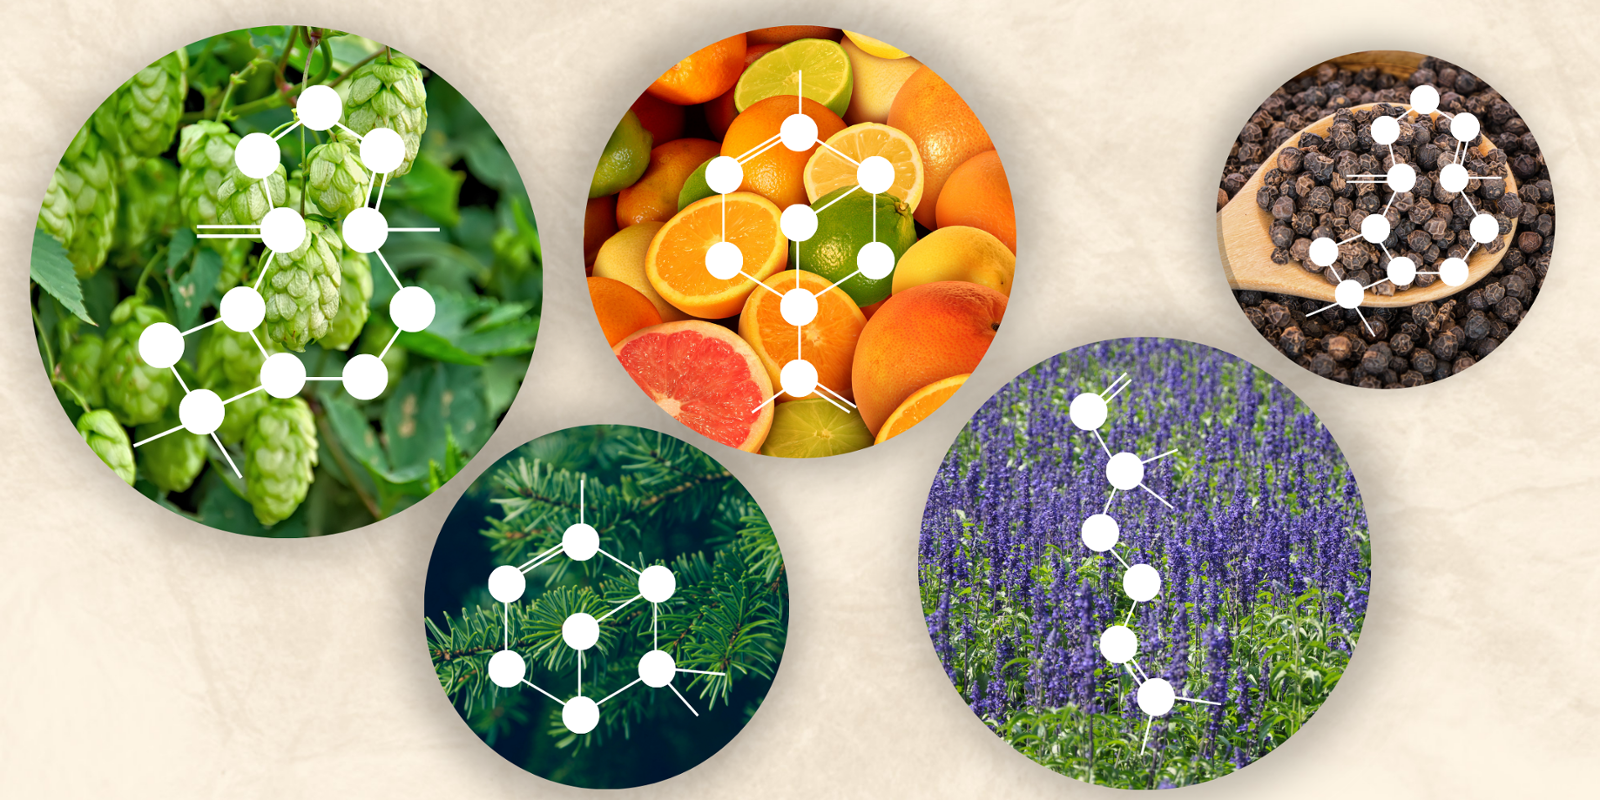 What Are Terpenes?